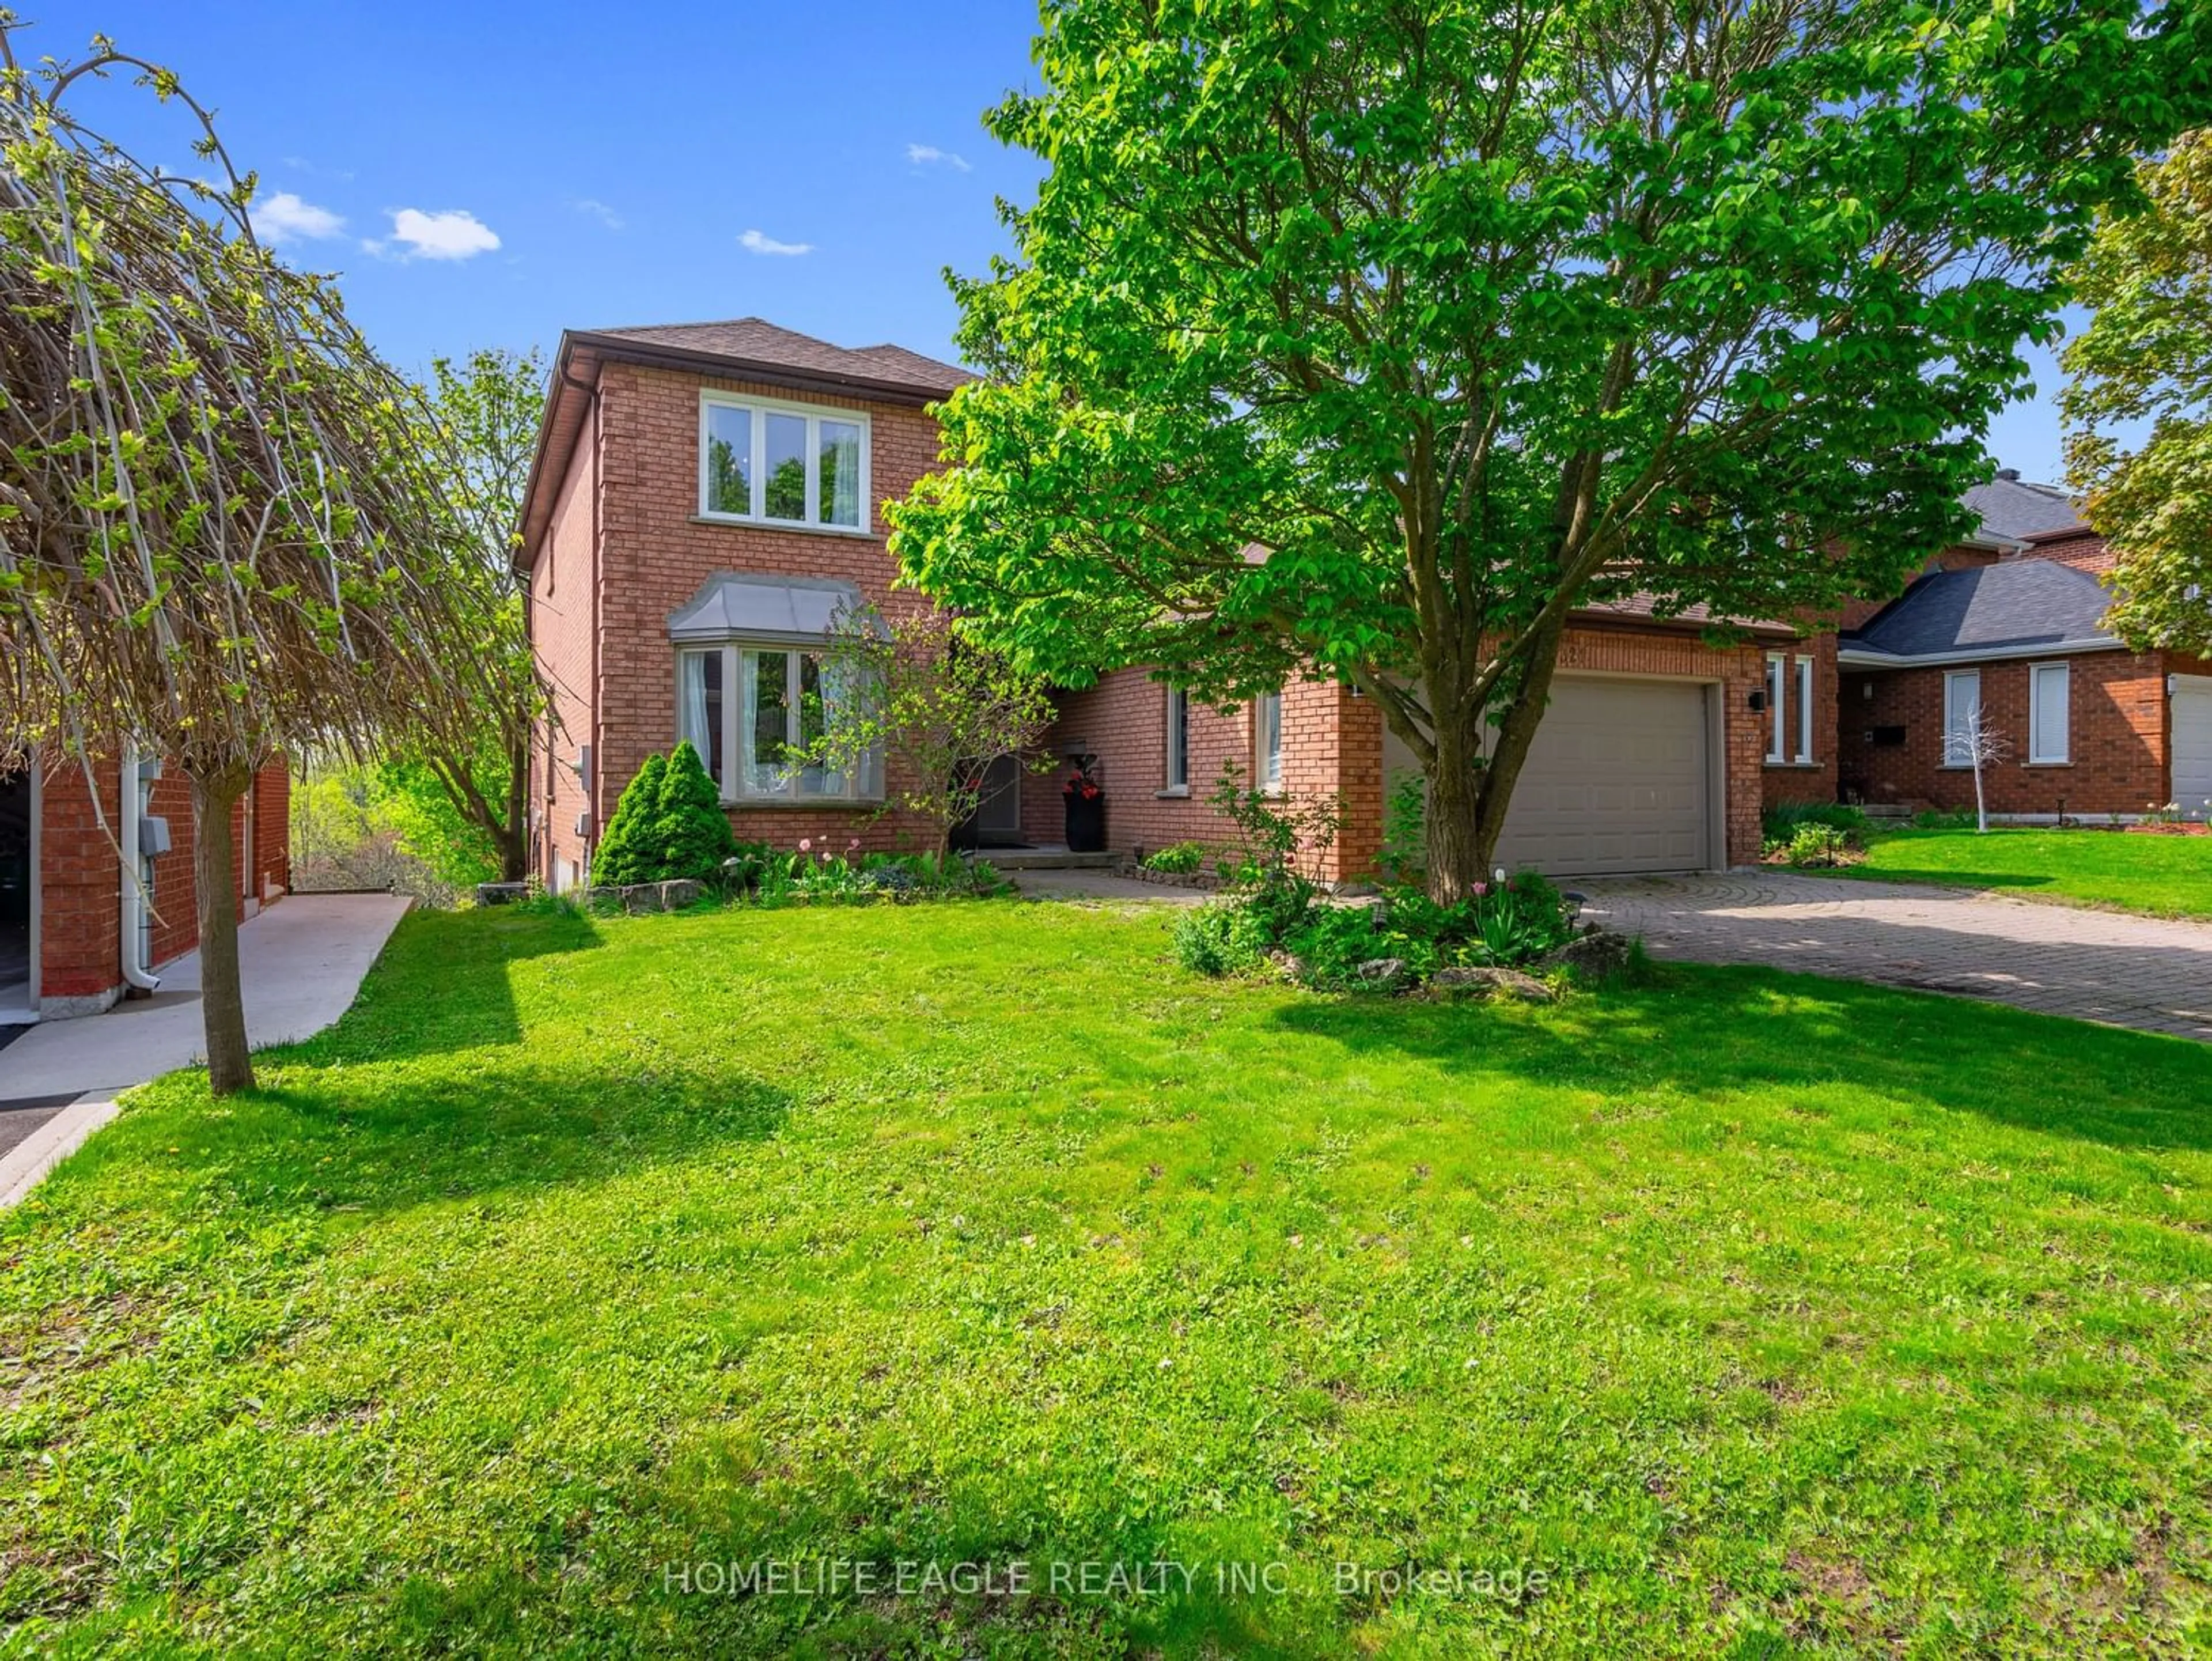 Frontside or backside of a home for 321 Jelley Ave, Newmarket Ontario L3X 1S5